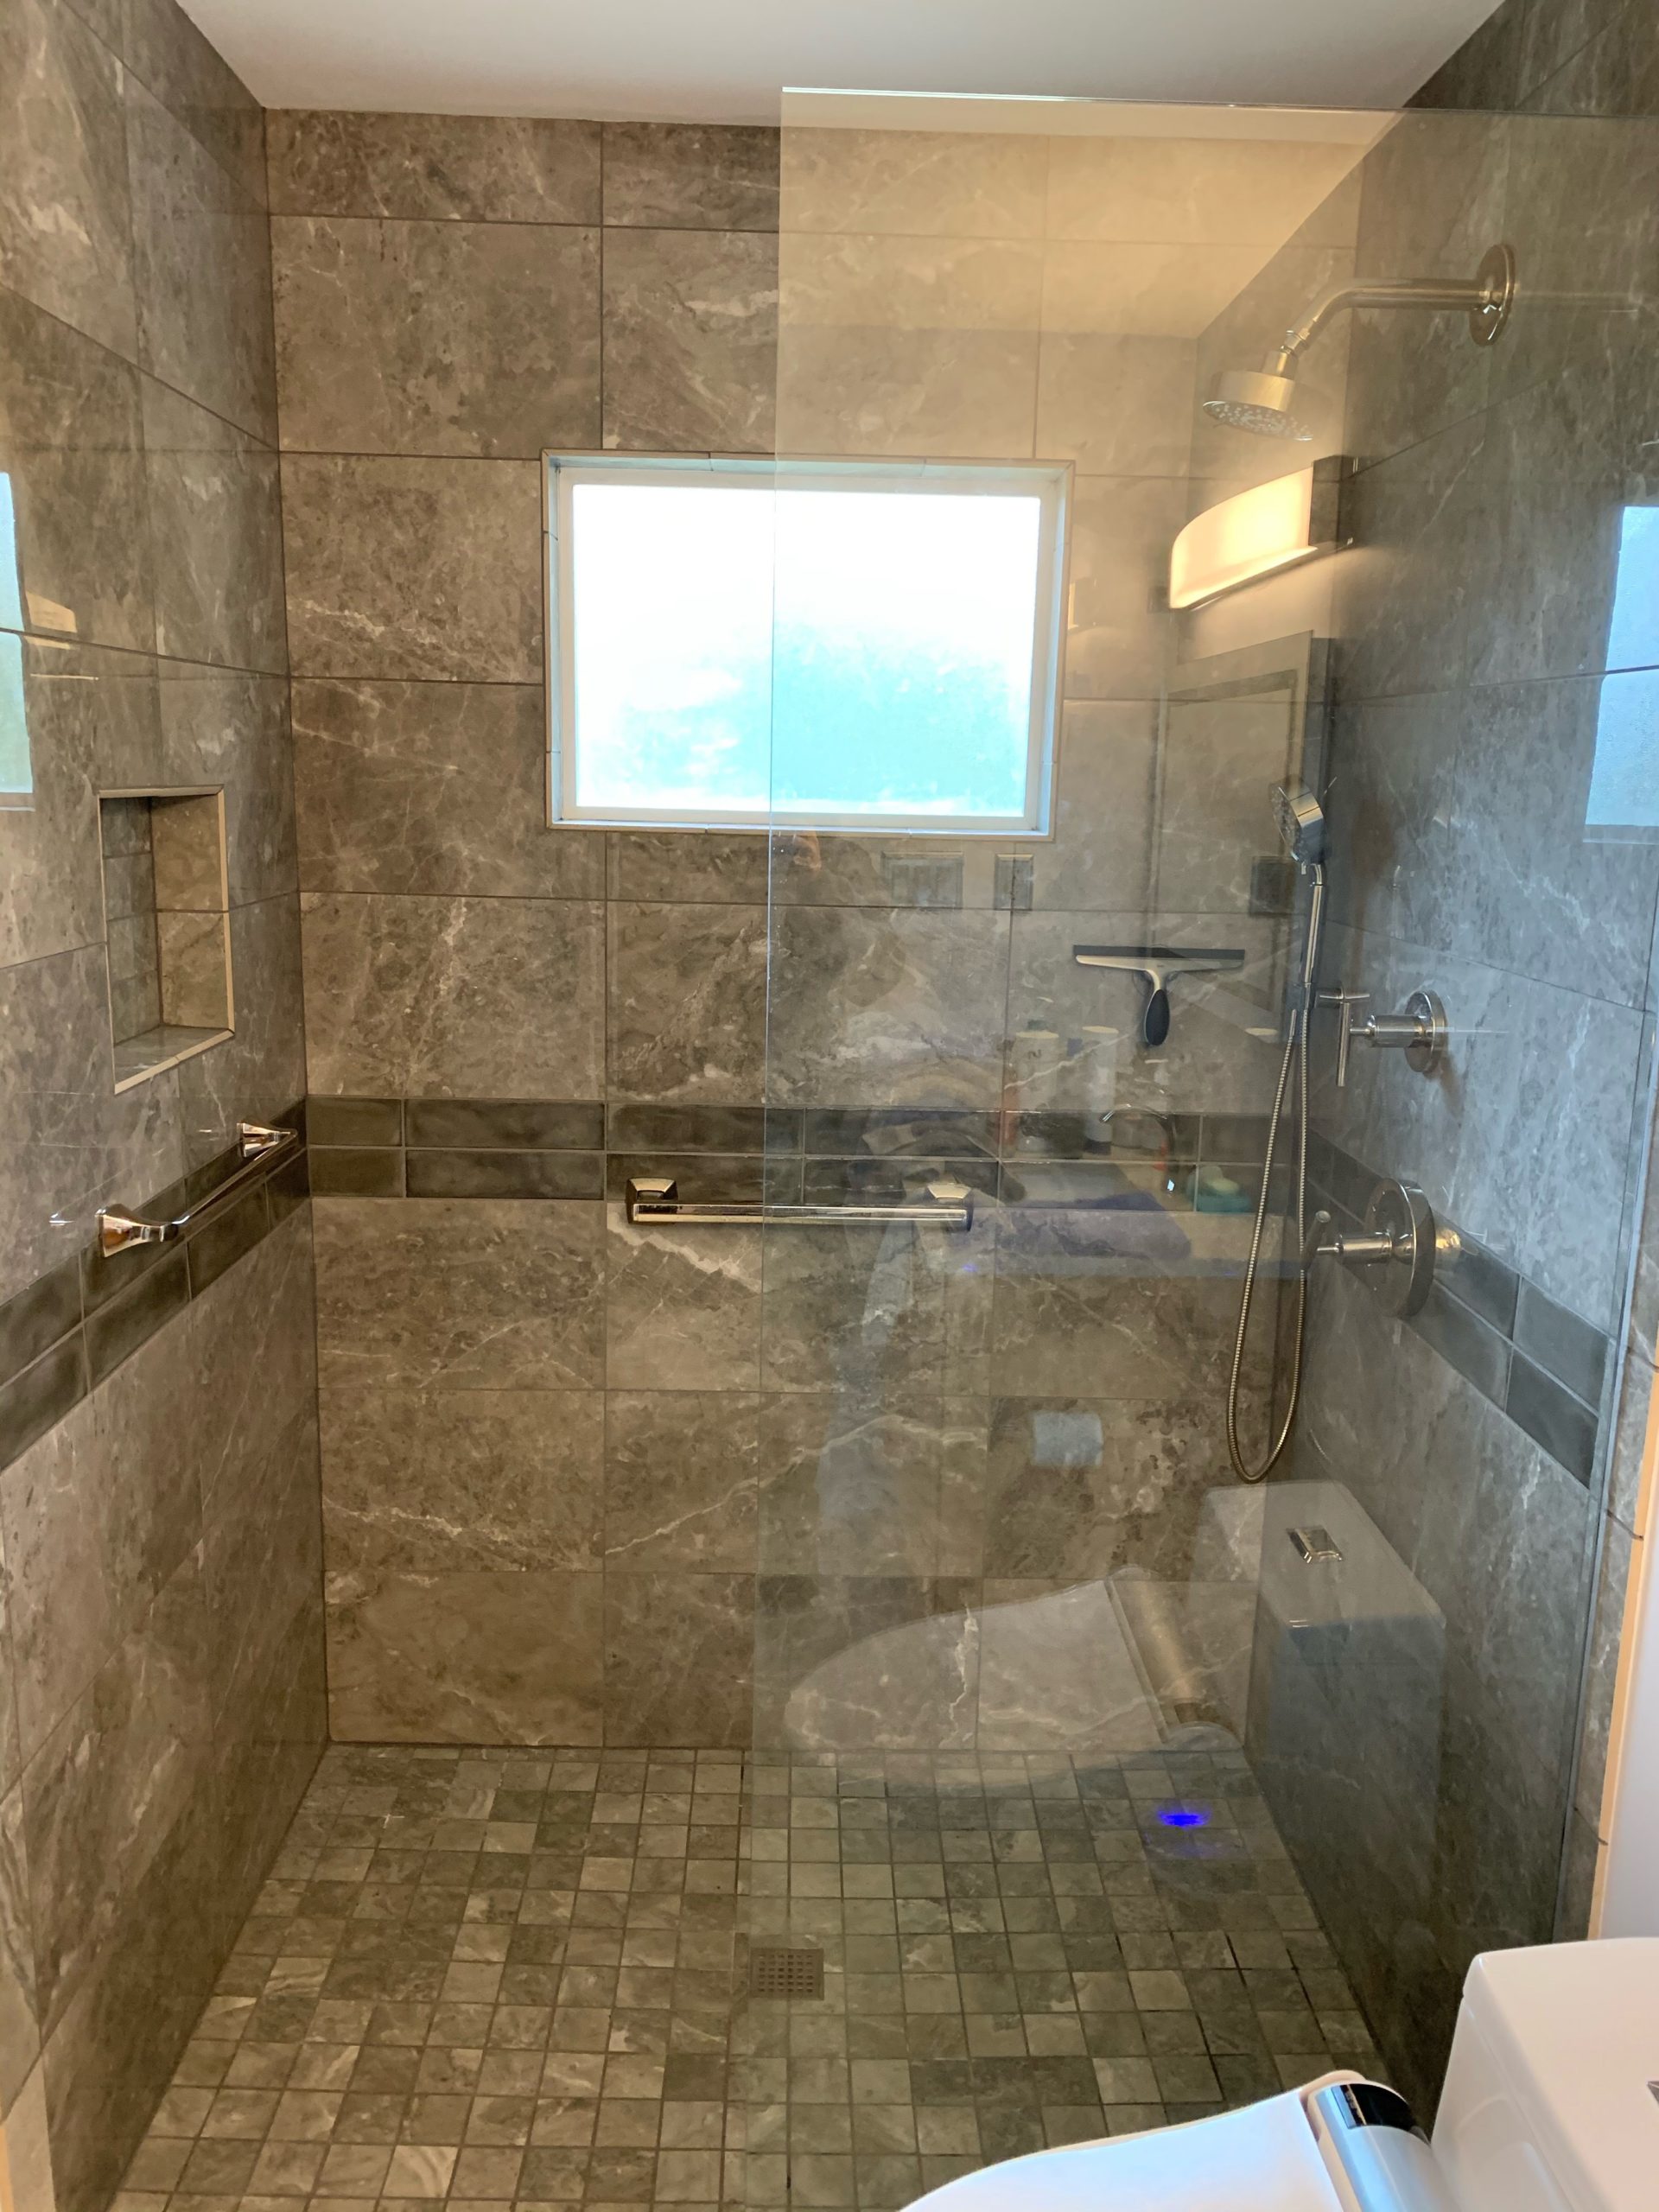 Lexington-area bathroom remodel with modern updates throughout